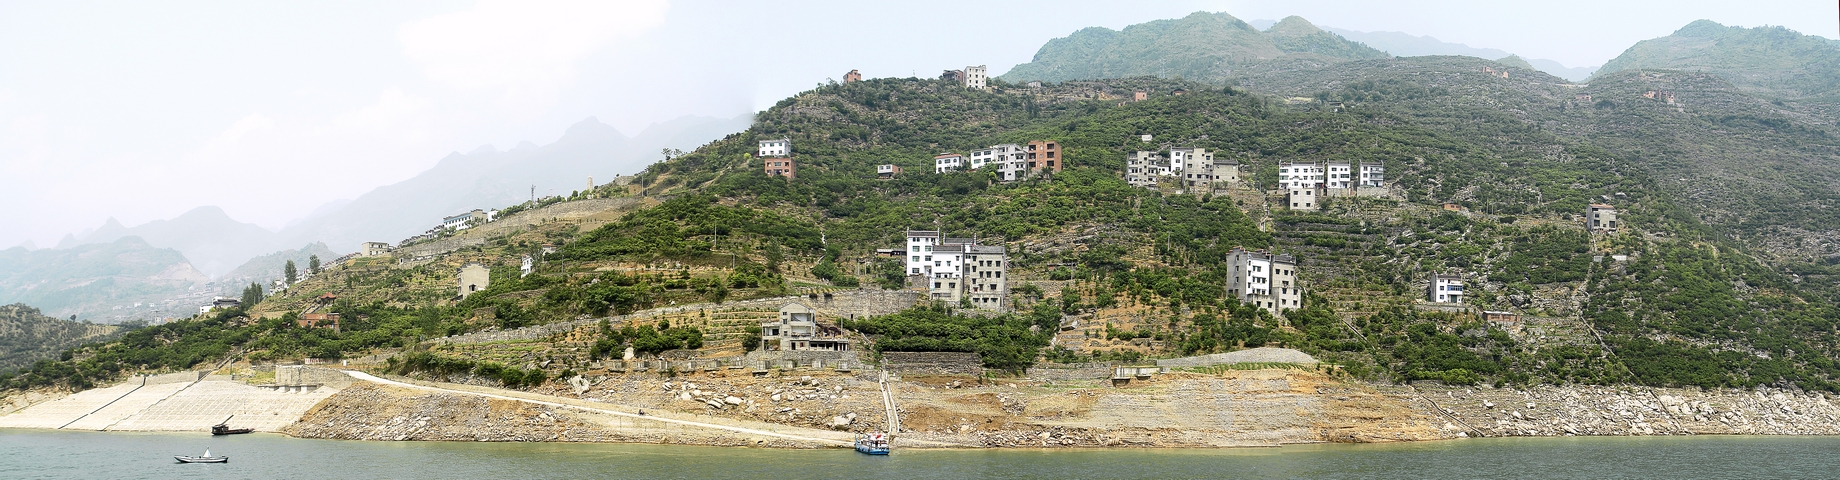 3Gorges29.jpg - 3 images, Size: 8620 x 2431, FOV: 100.59 x 27.60, RMS: 3.15, Lens: Standard, Projection: Cylindrical, Color: LDR